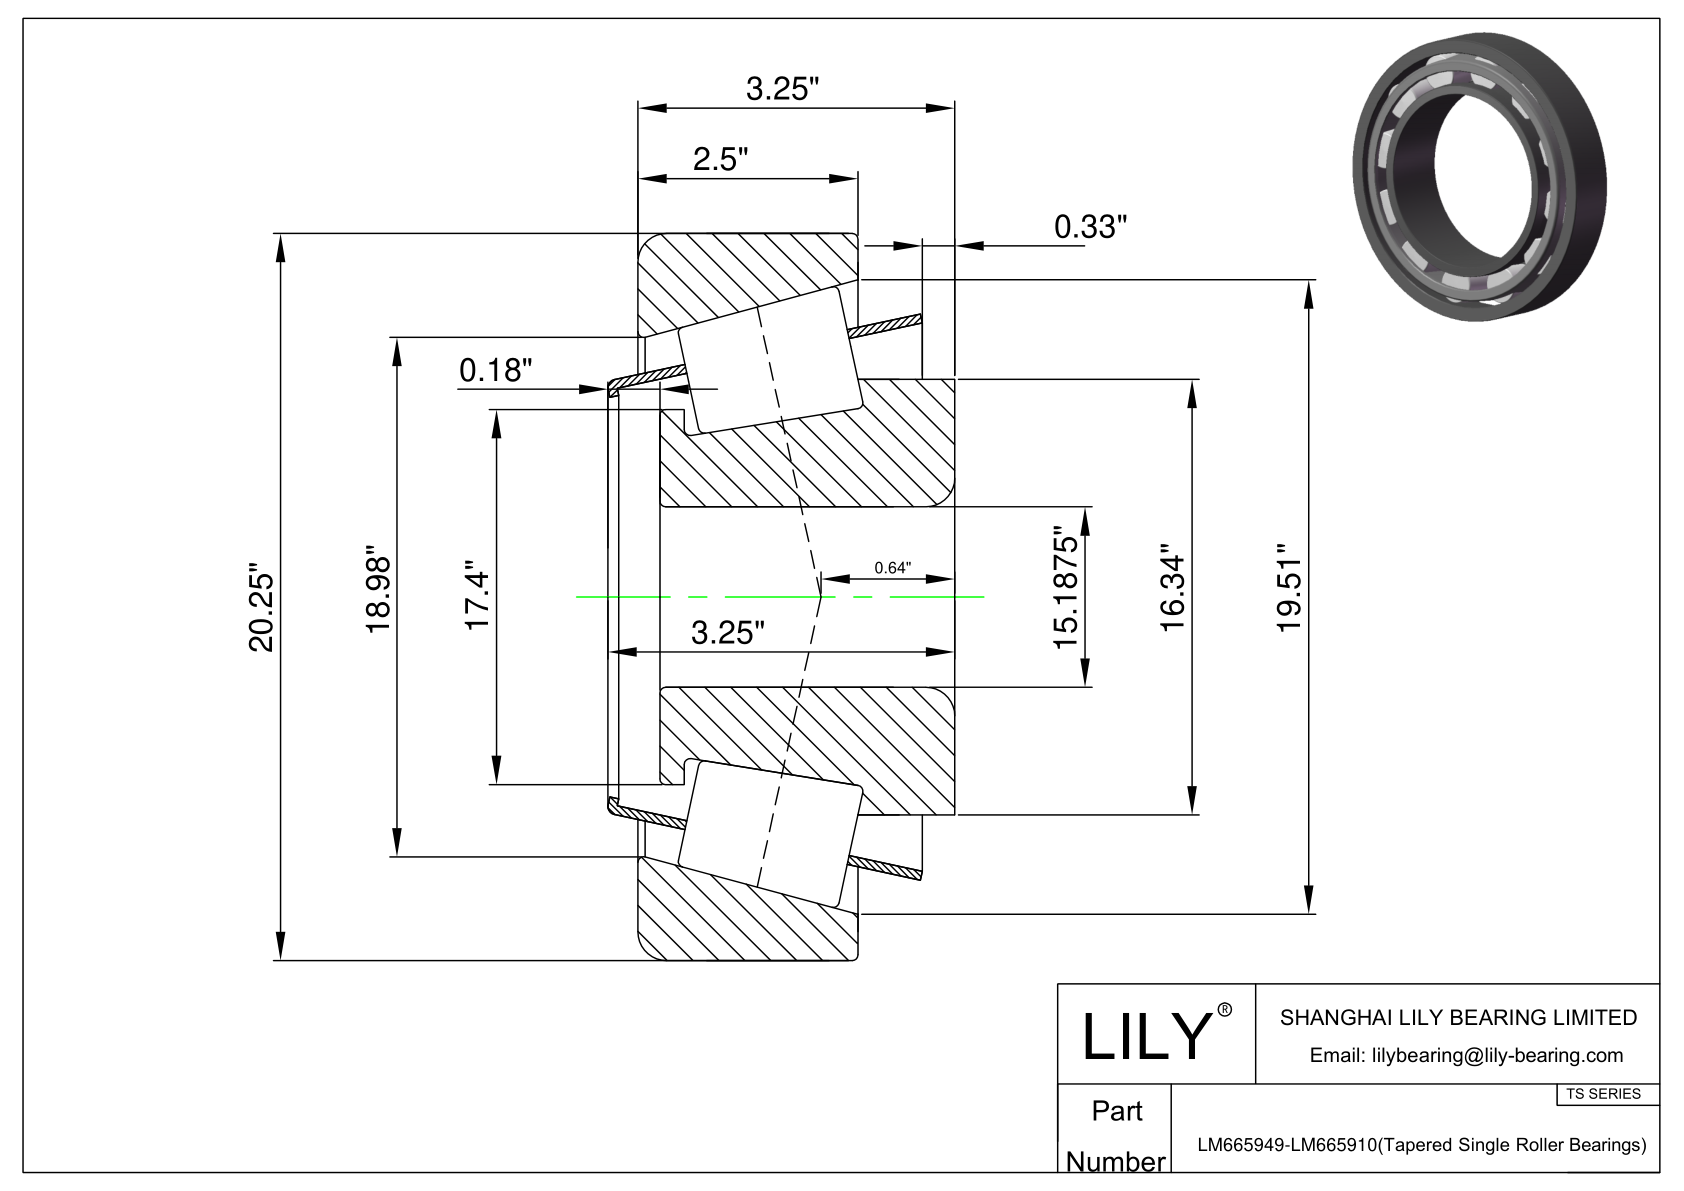 LM665949-LM665910 TS (Tapered Single Roller Bearings) (Imperial) cad drawing